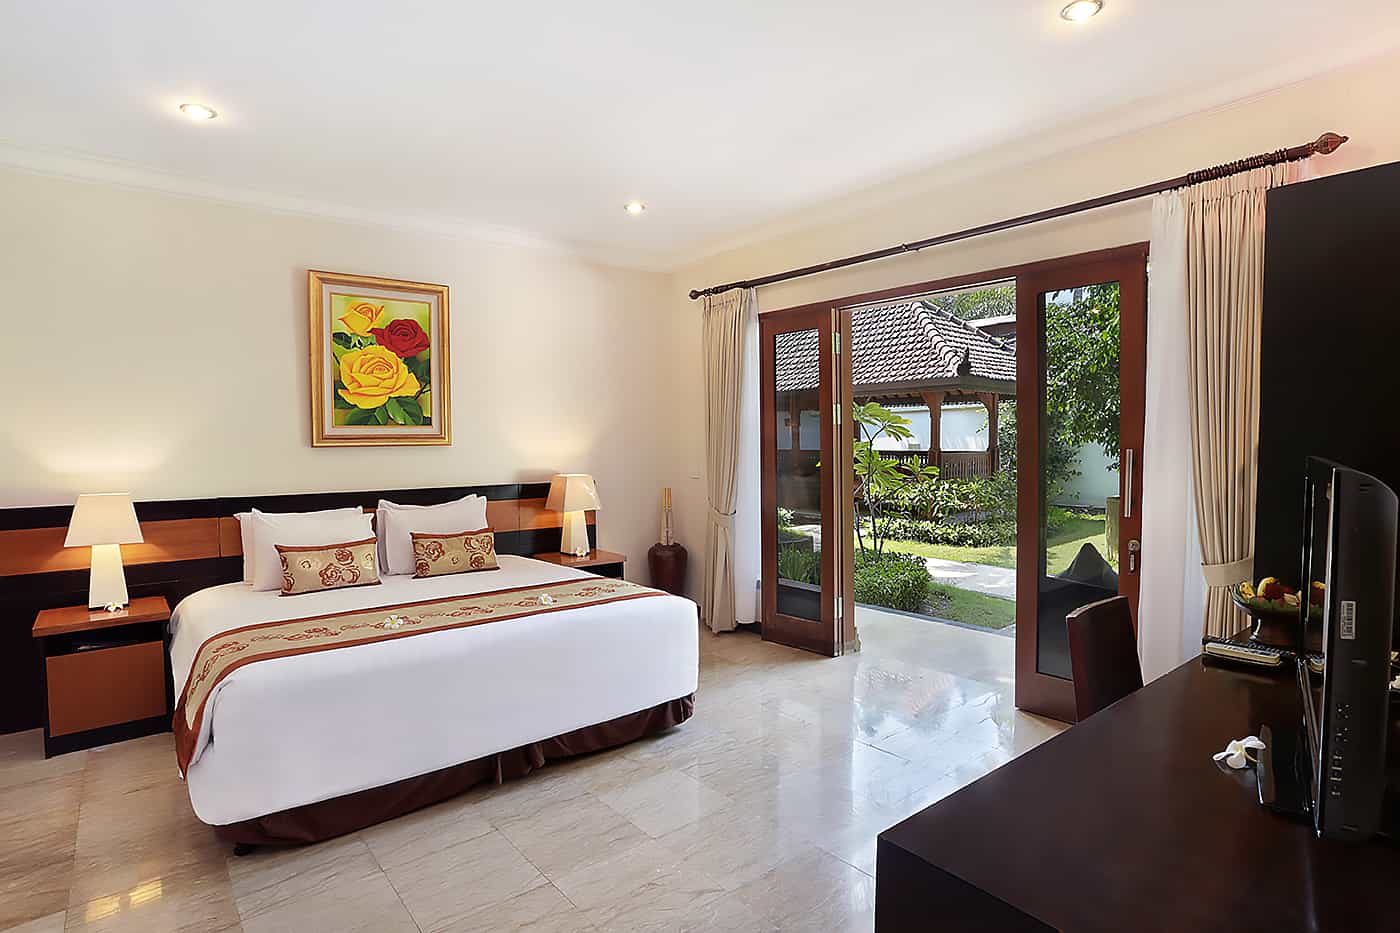 Deluxe Family Room accommodation at Hotel Ombak Sunset in Gili Trawangan Island of Lombok Indonesia